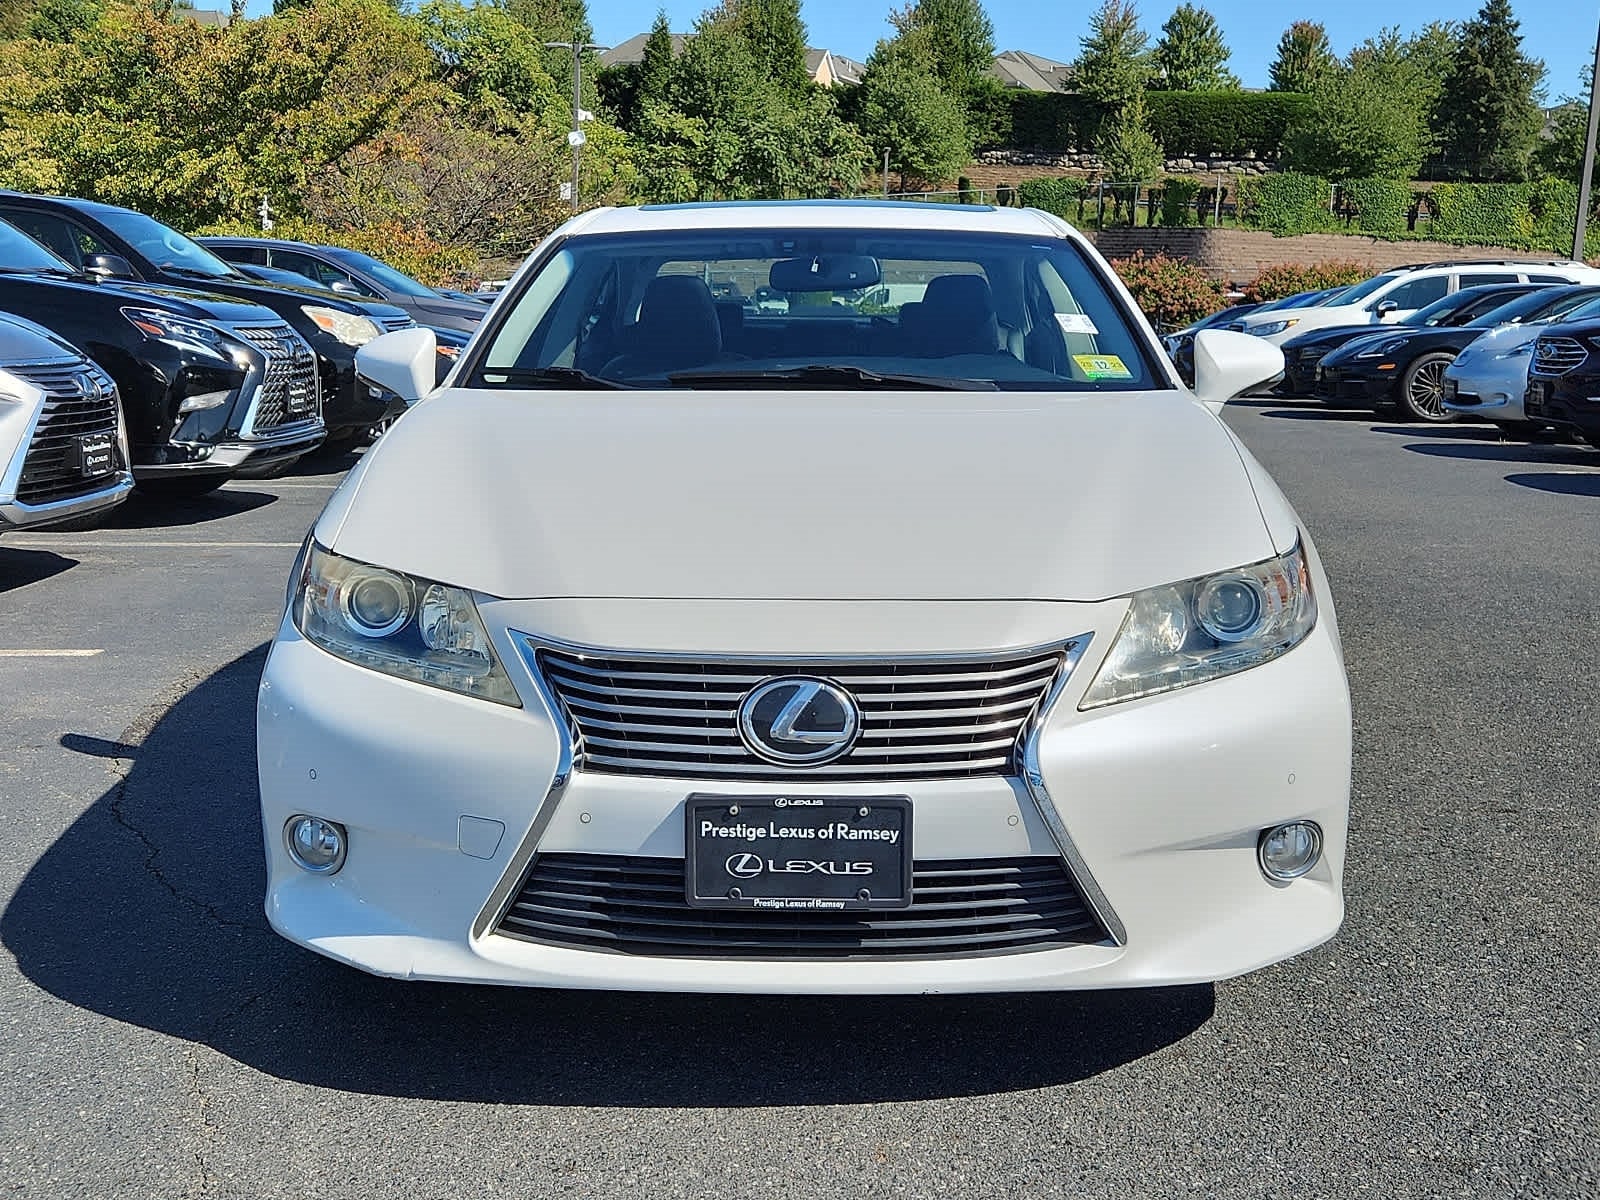 Used 2013 Lexus ES 350 with VIN JTHBK1GG8D2025779 for sale in Ramsey, NJ